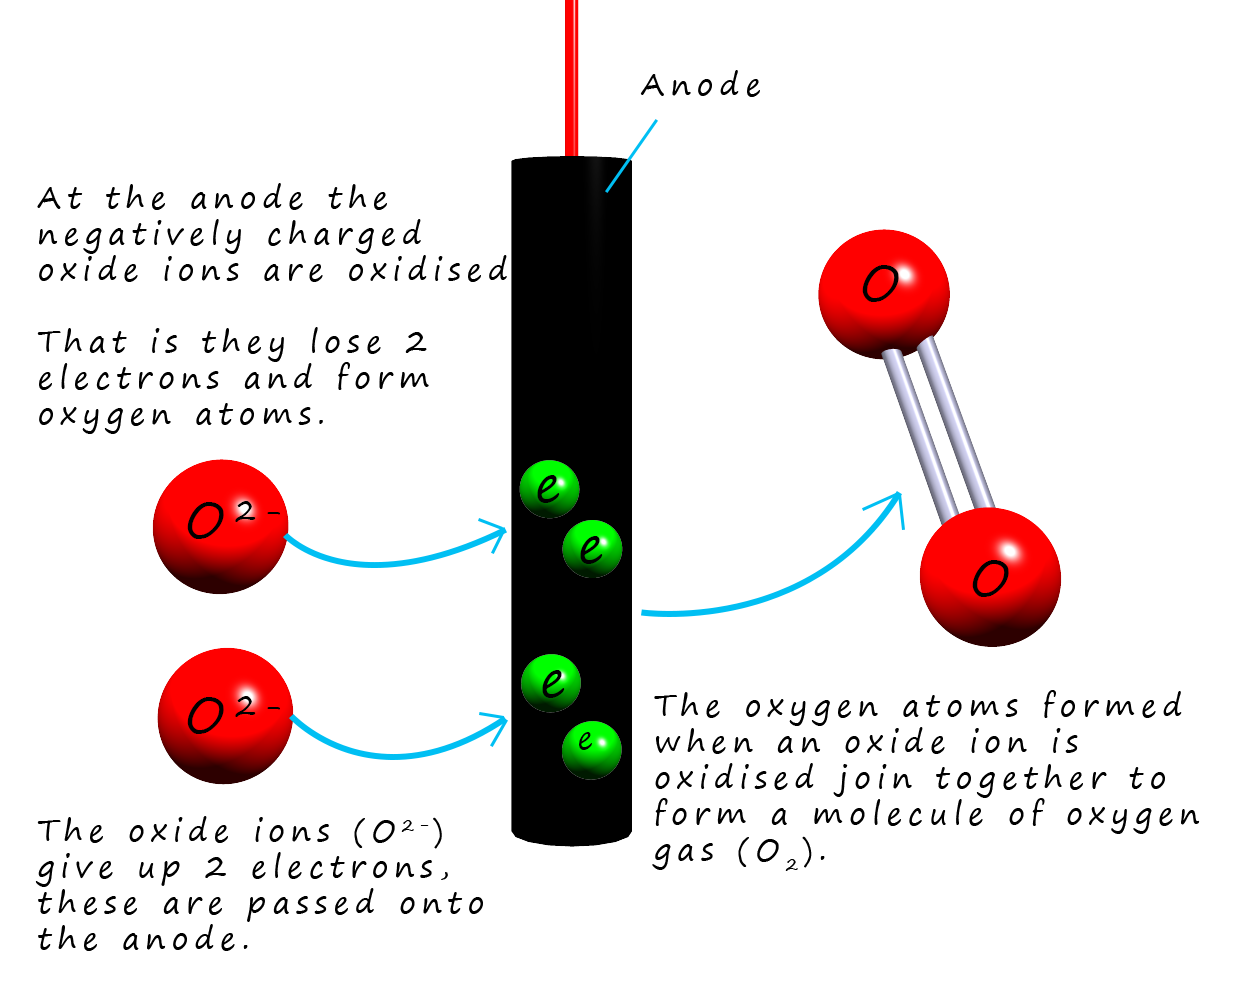 the oxidation of oxide ions at the anode to form oxygen gas